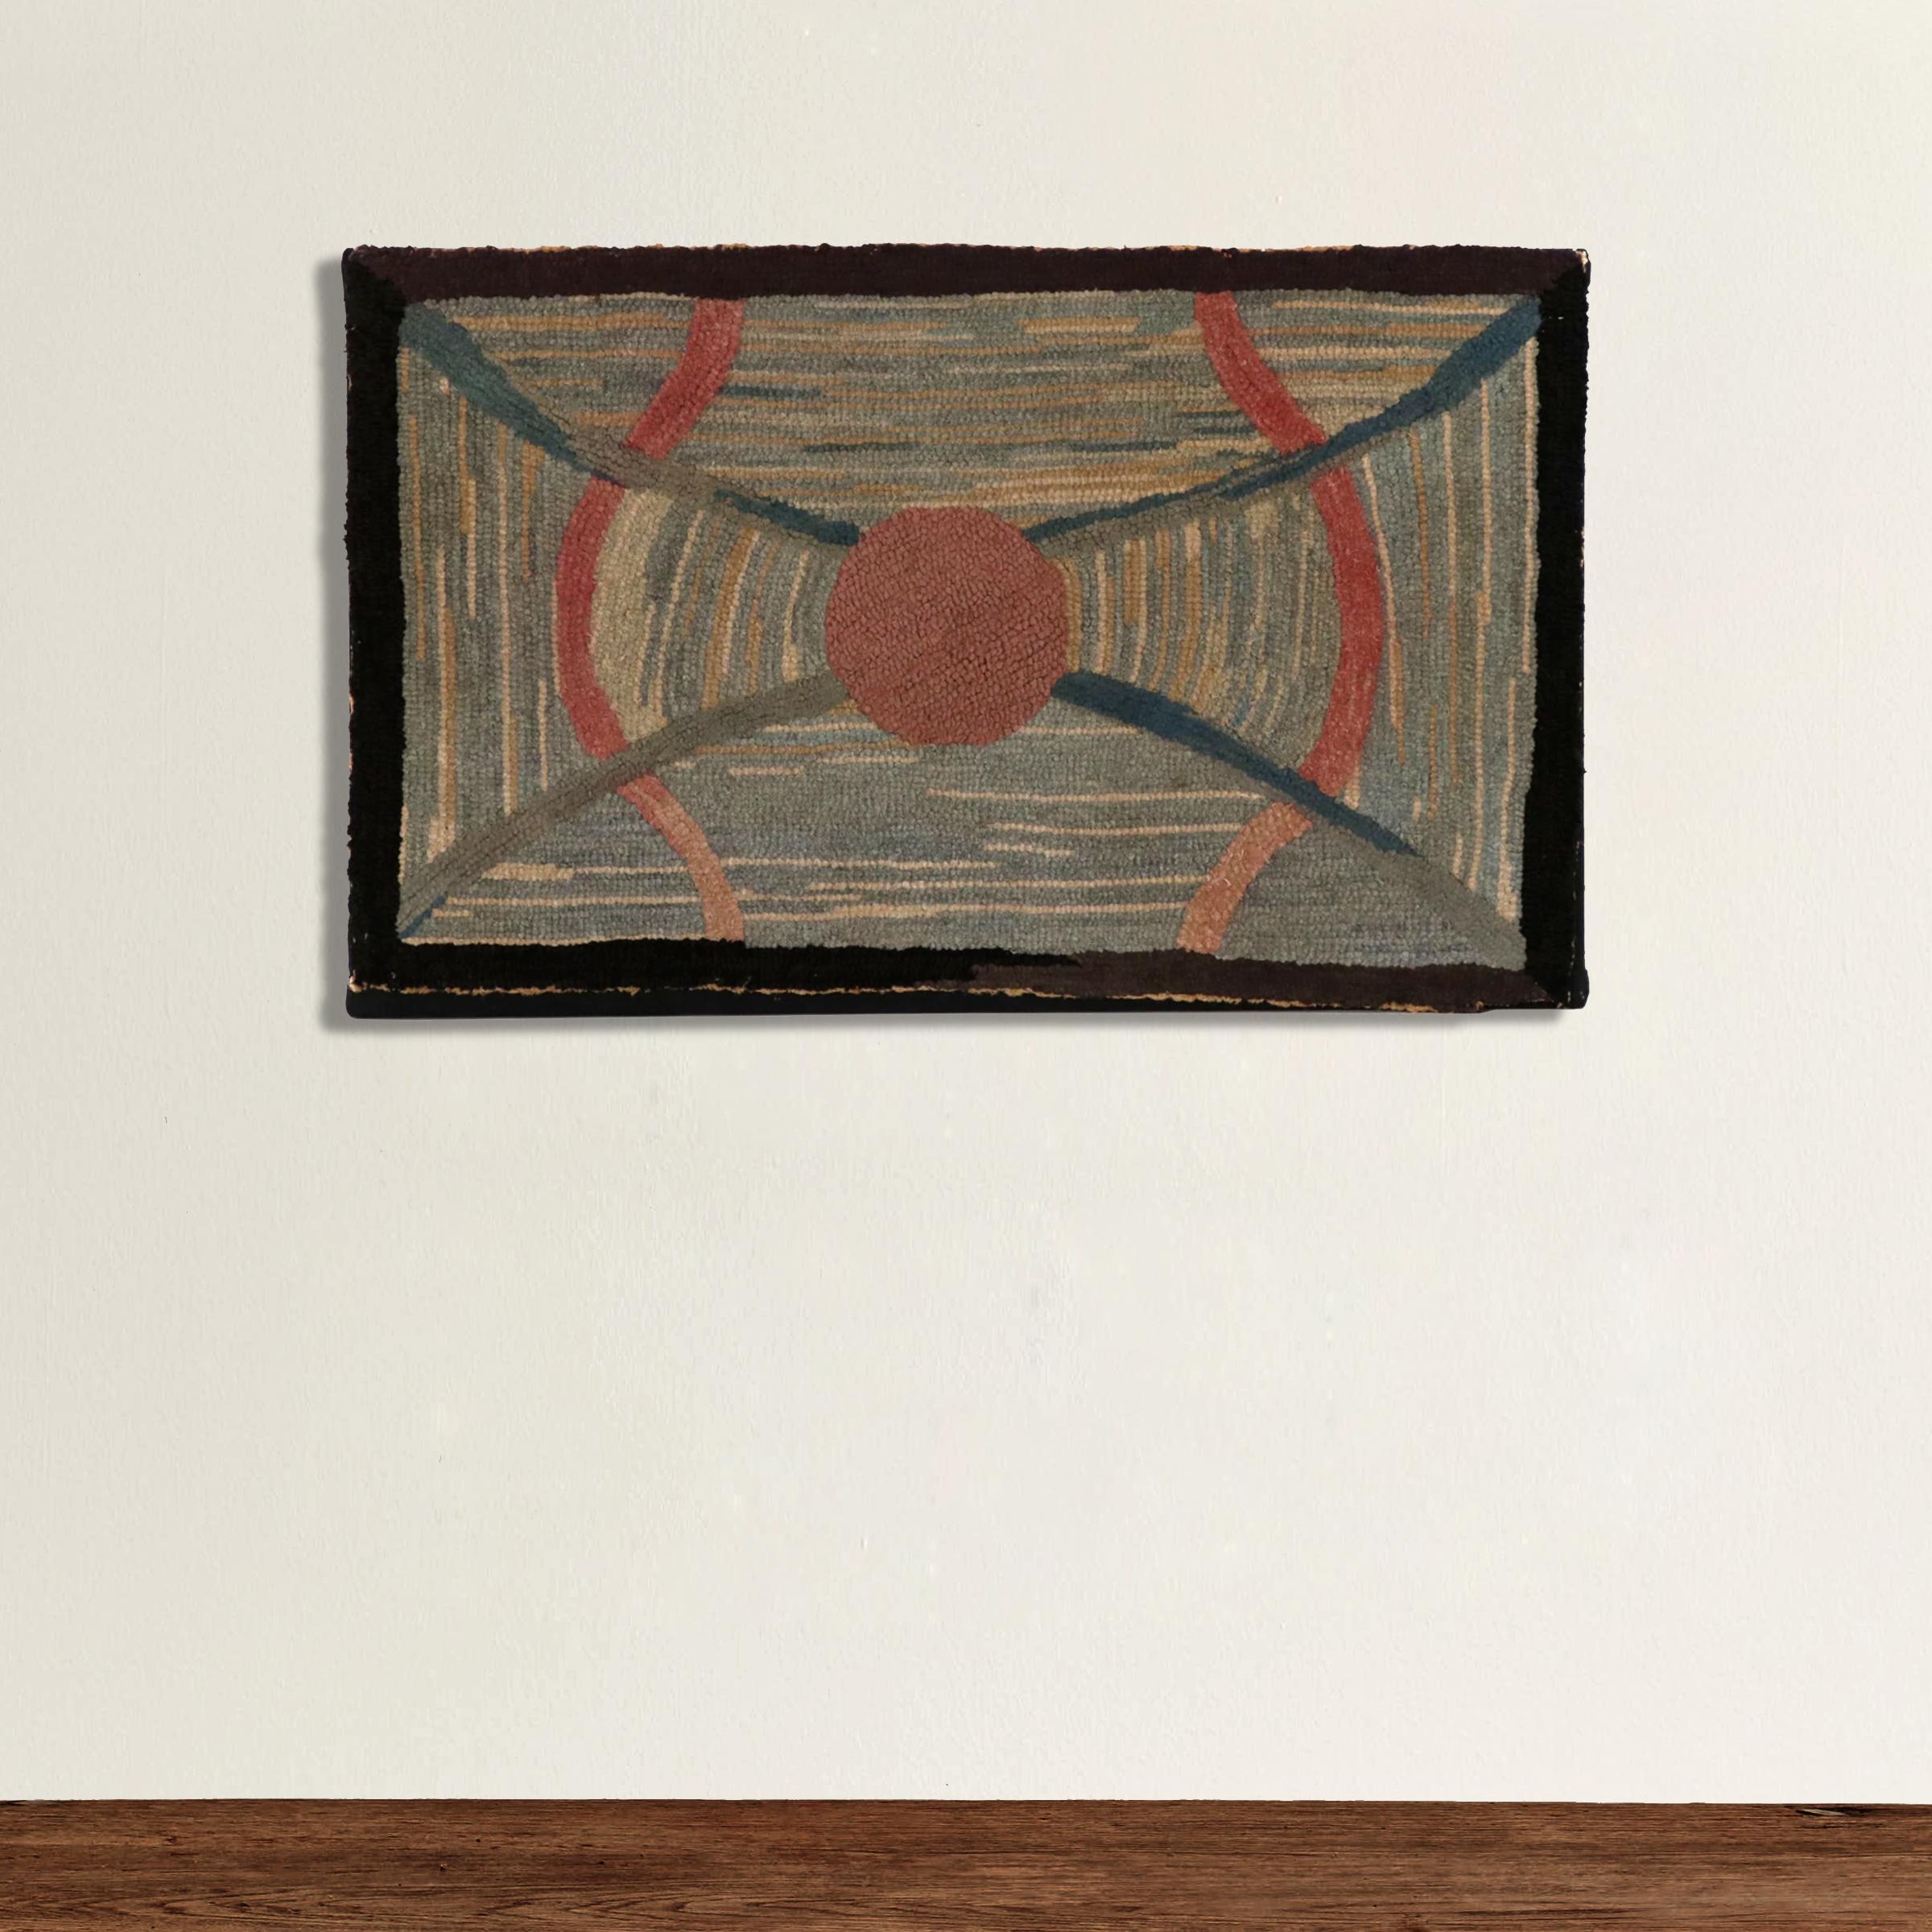 A charming early 20th century American hook rug with a wonderfully abstract pattern containing a large red circle in the center with pairs of red and blue curved lines against a variegated background. Mounted to a black linen stretched canvas.